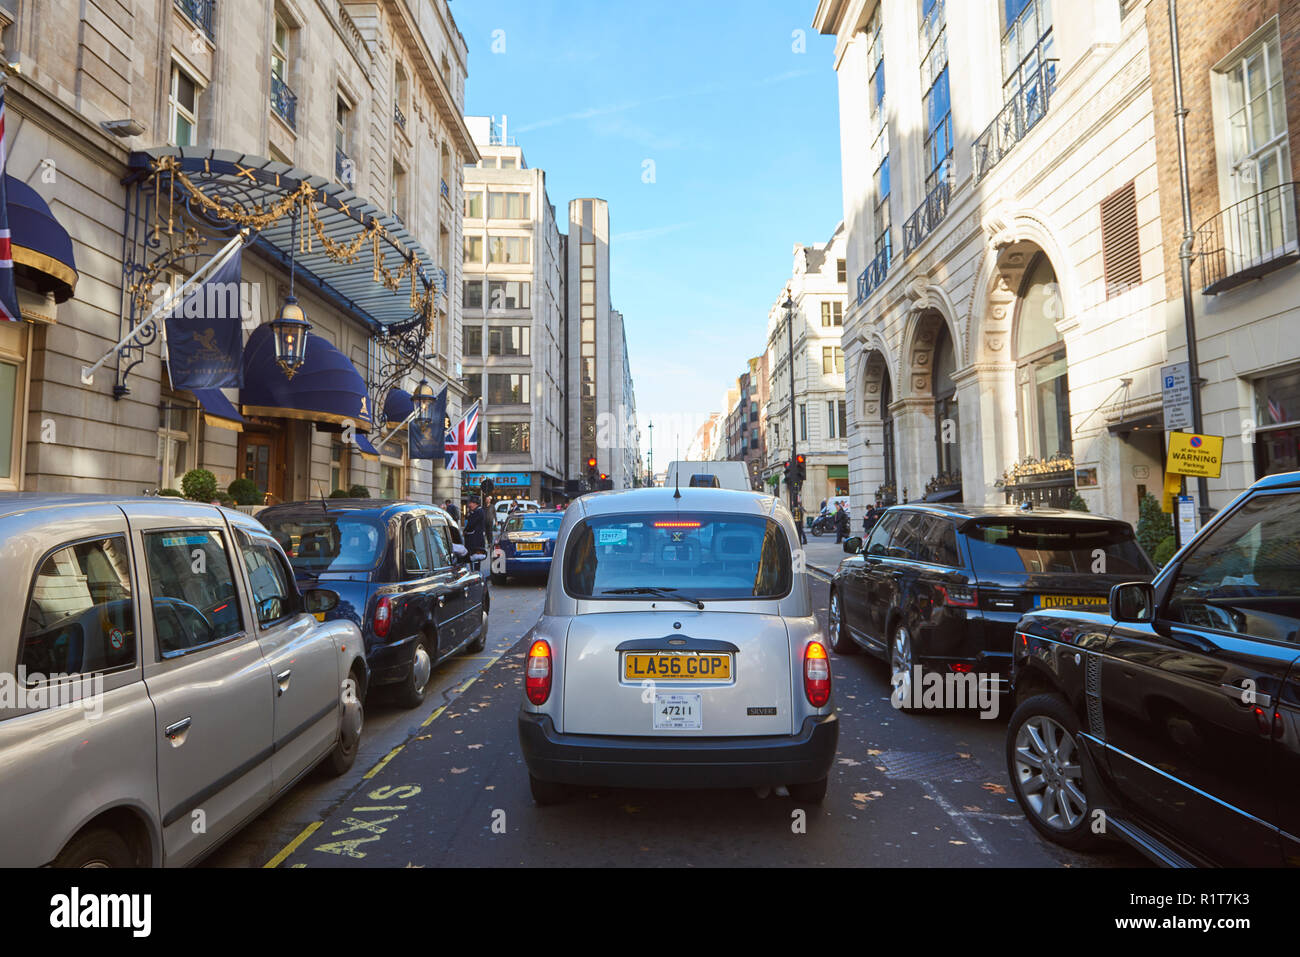 Arlington Street facing North, where the Ritz Hotel is located in London, UK. Stock Photo